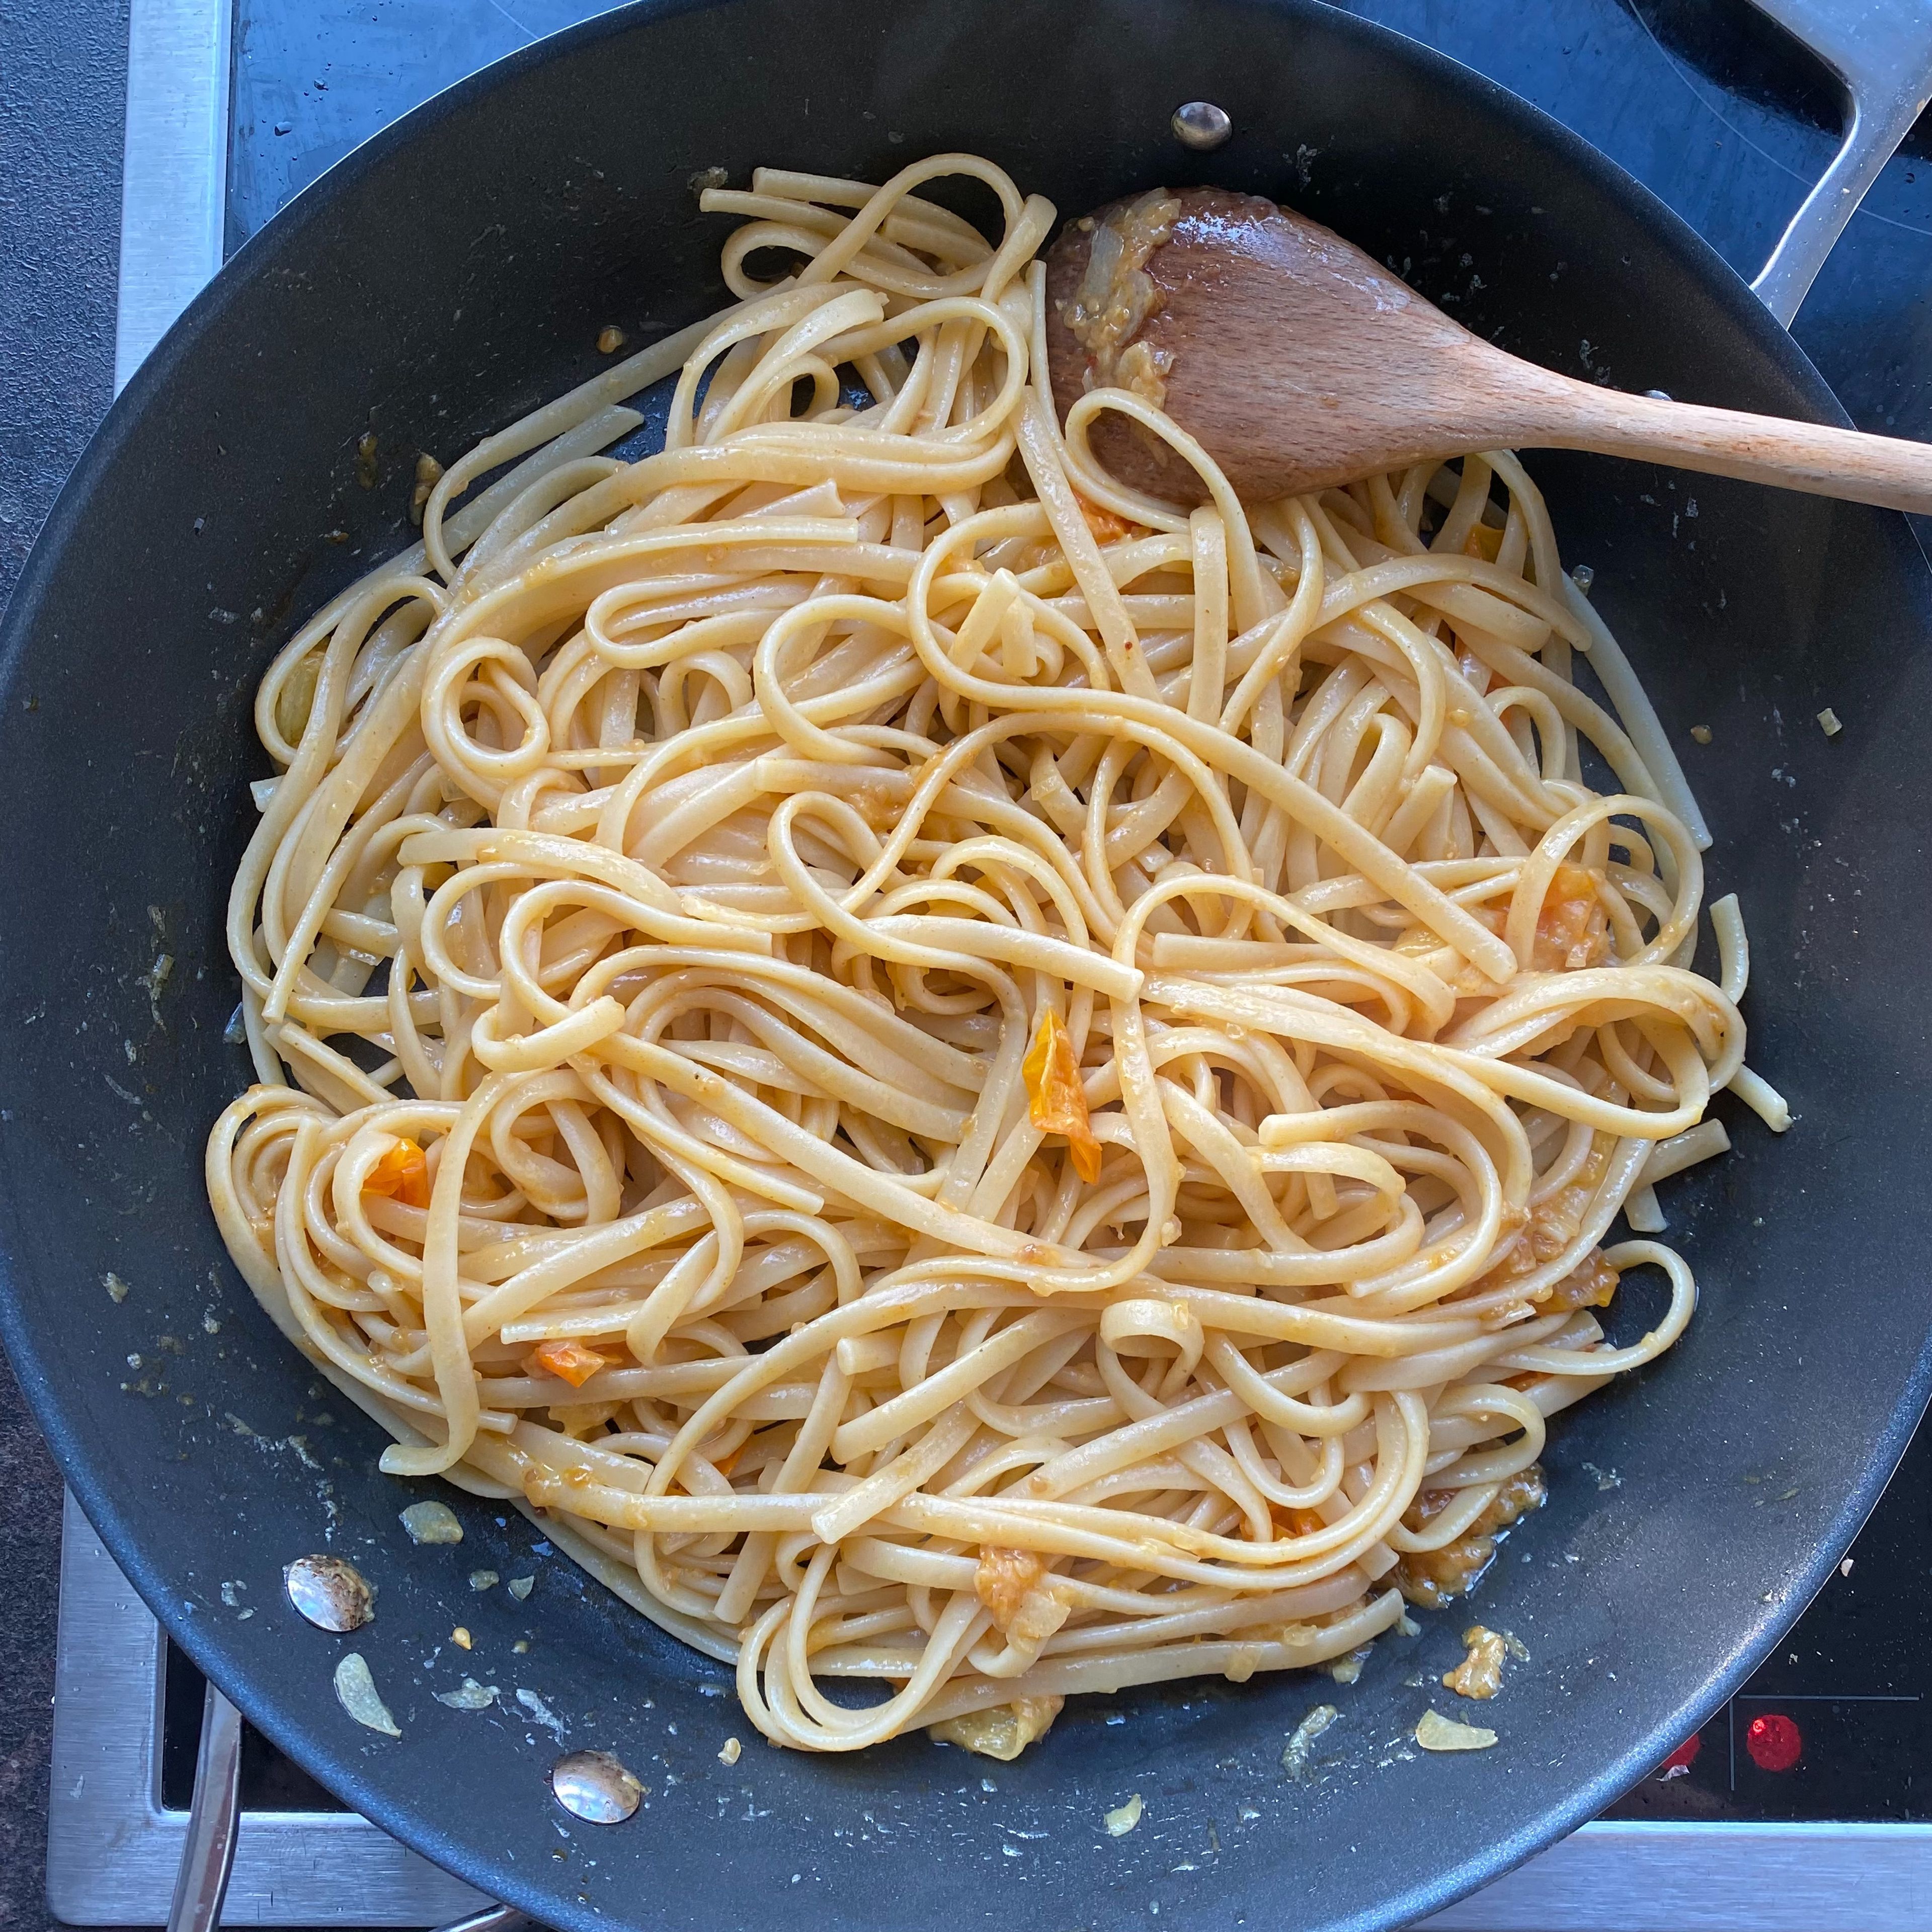 Turn off the stove and stirr in the pasta. Season with salt, pepper, some lemon juice and a bit sugar.